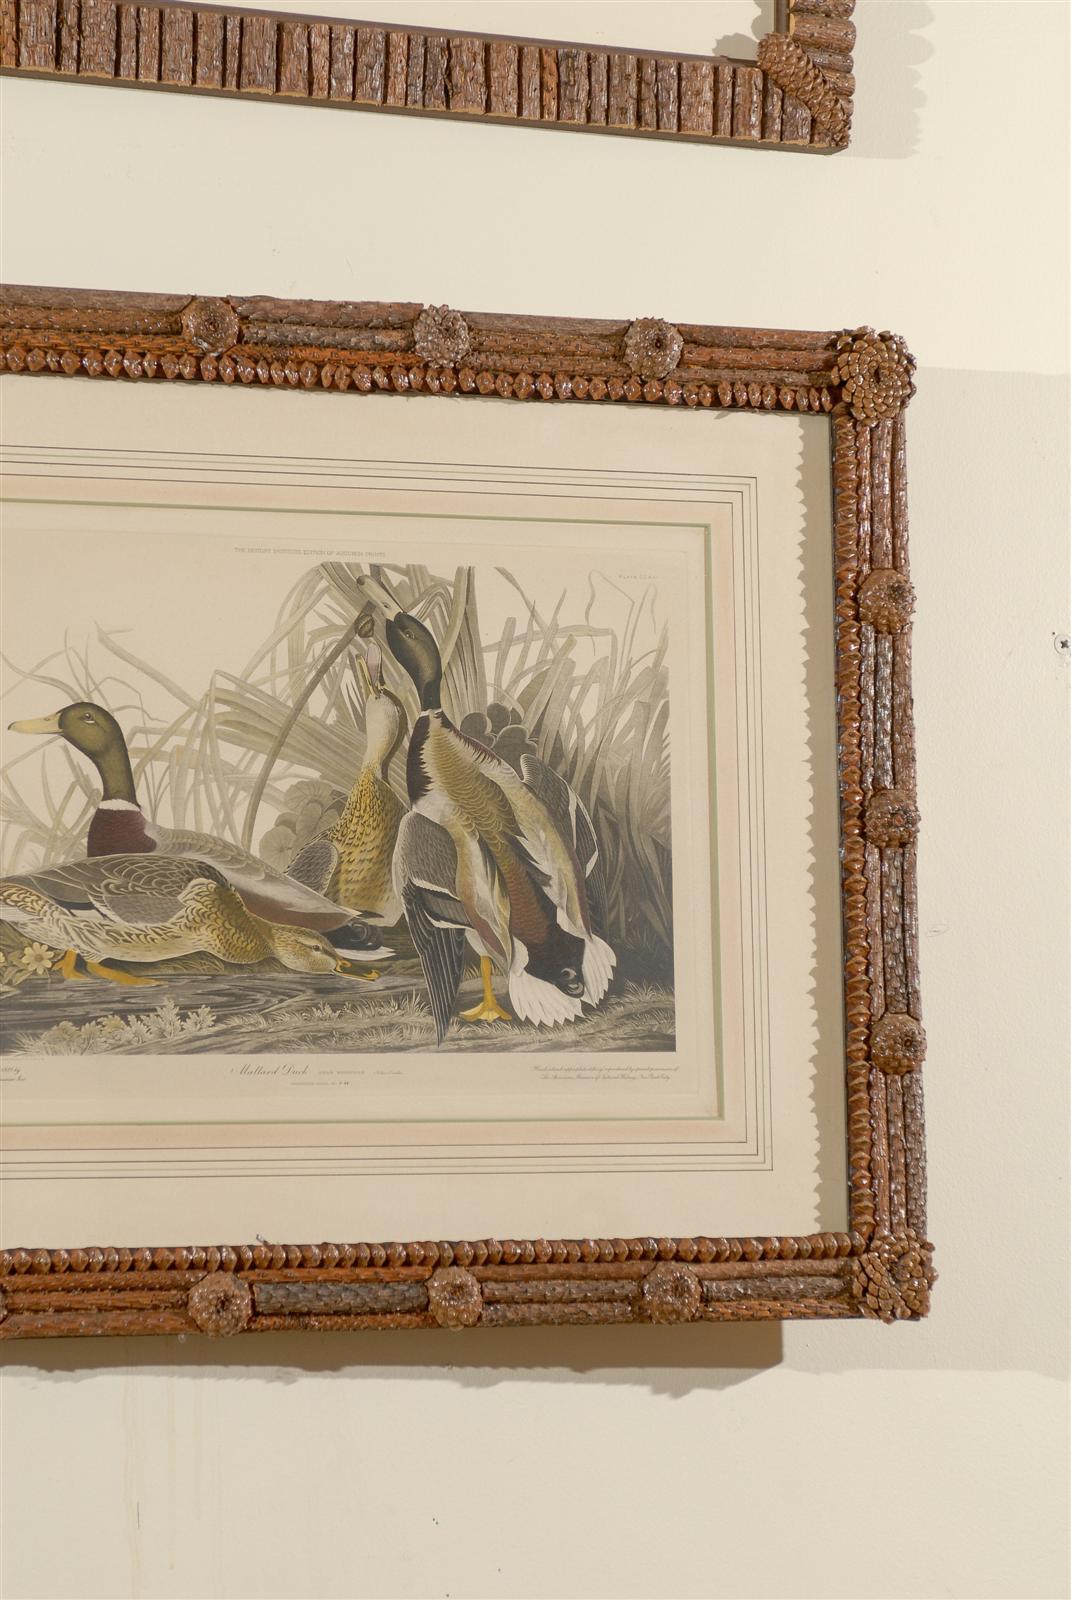 Contemporary Audubon Print in Hand-Crafted Pine Cone and Bark Frame